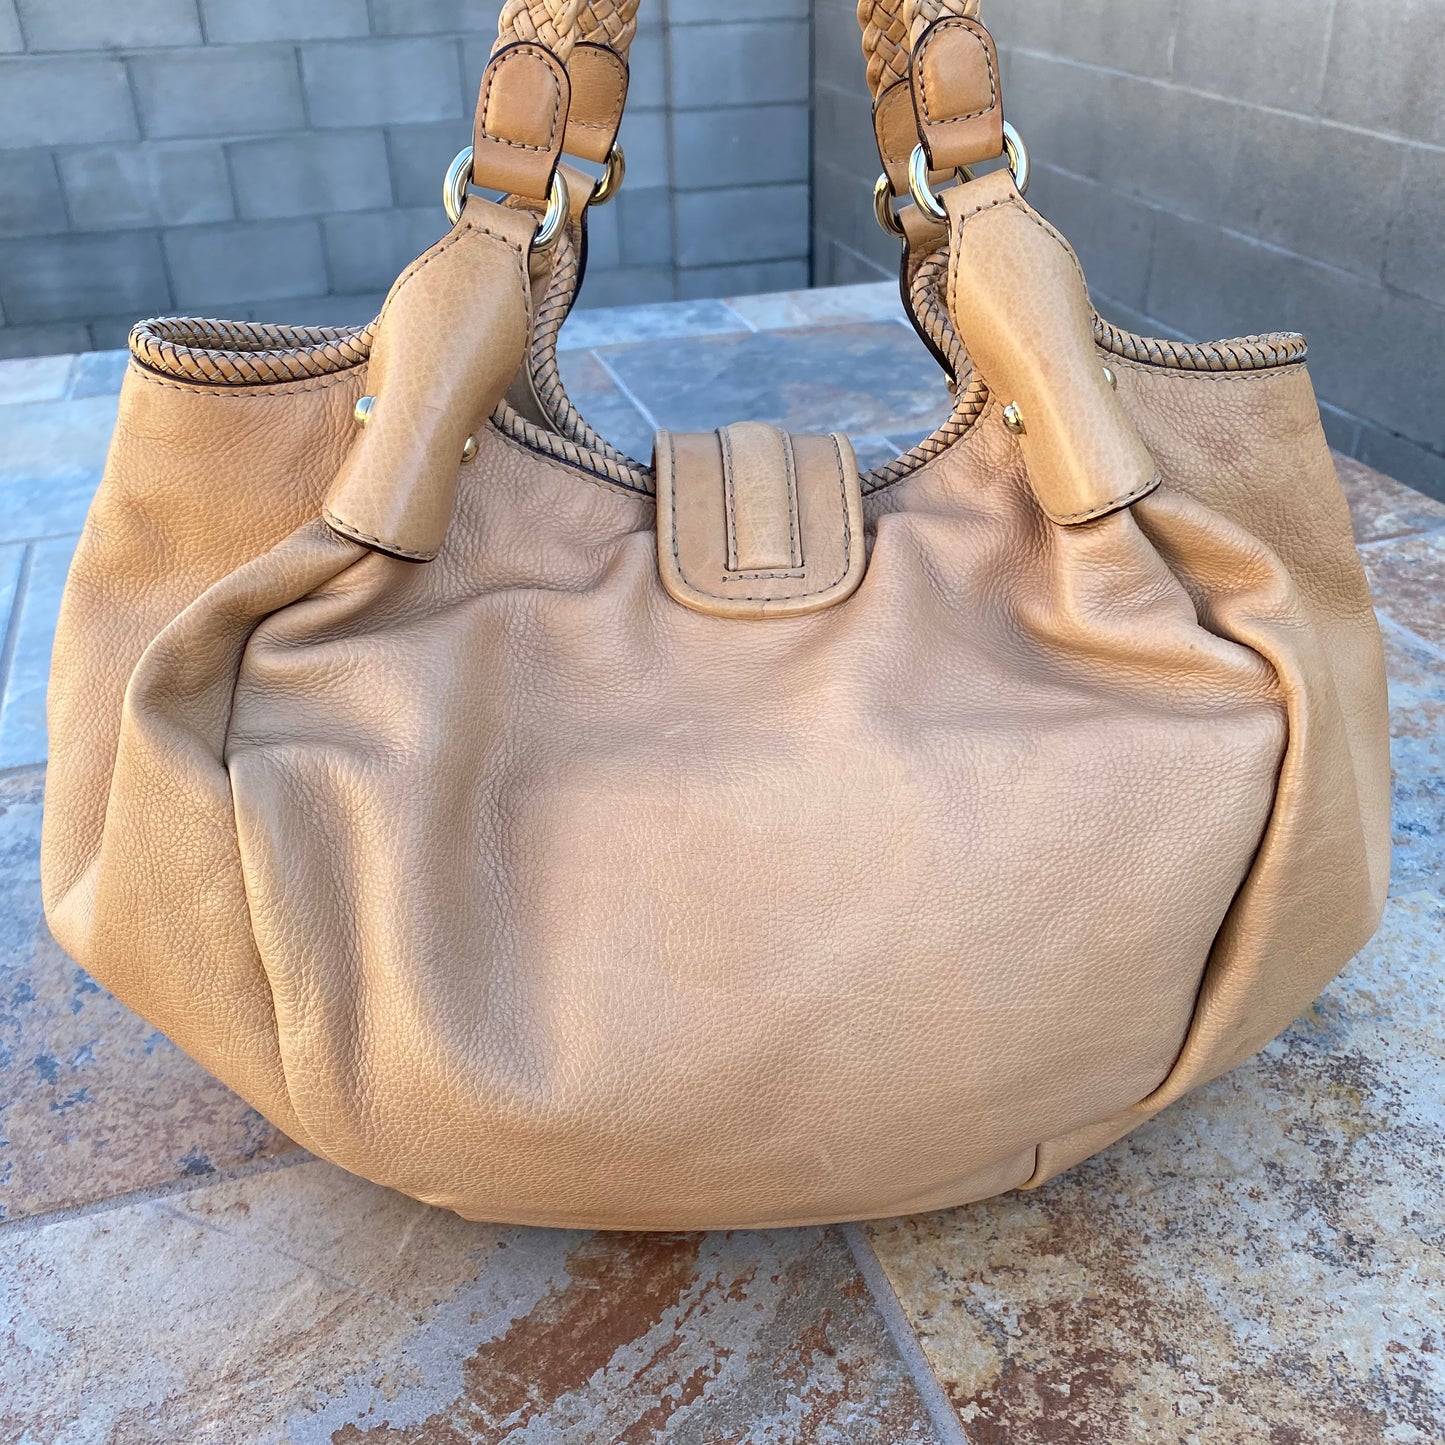 Gucci Marrakech Large Pebbled Leather Hobo